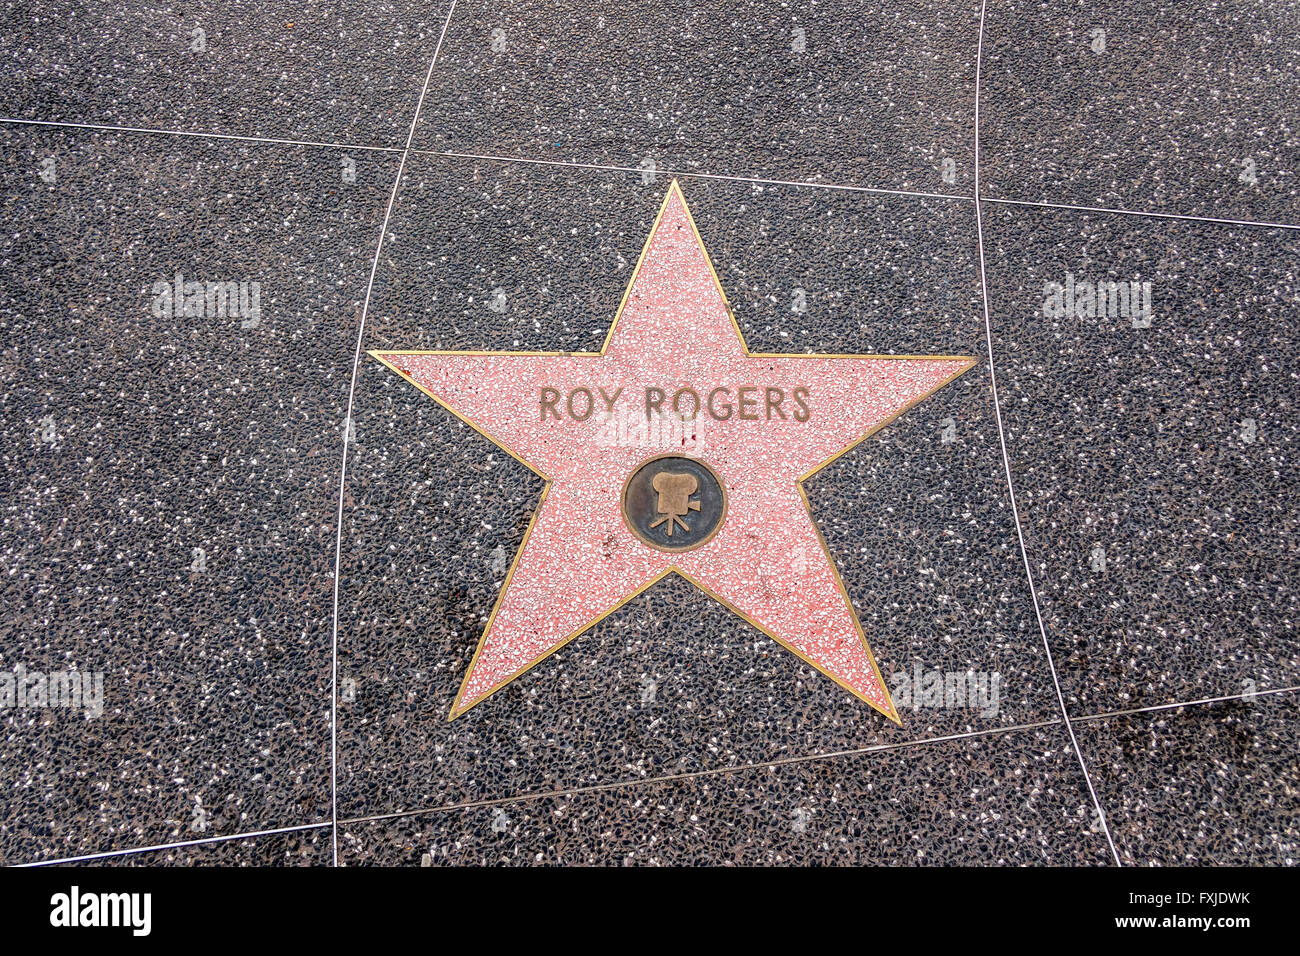 Replica Of The Roy Rogers Star From The Hollywood Walk Of Fame At Universal Studios Theme Park Florida Stock Photo